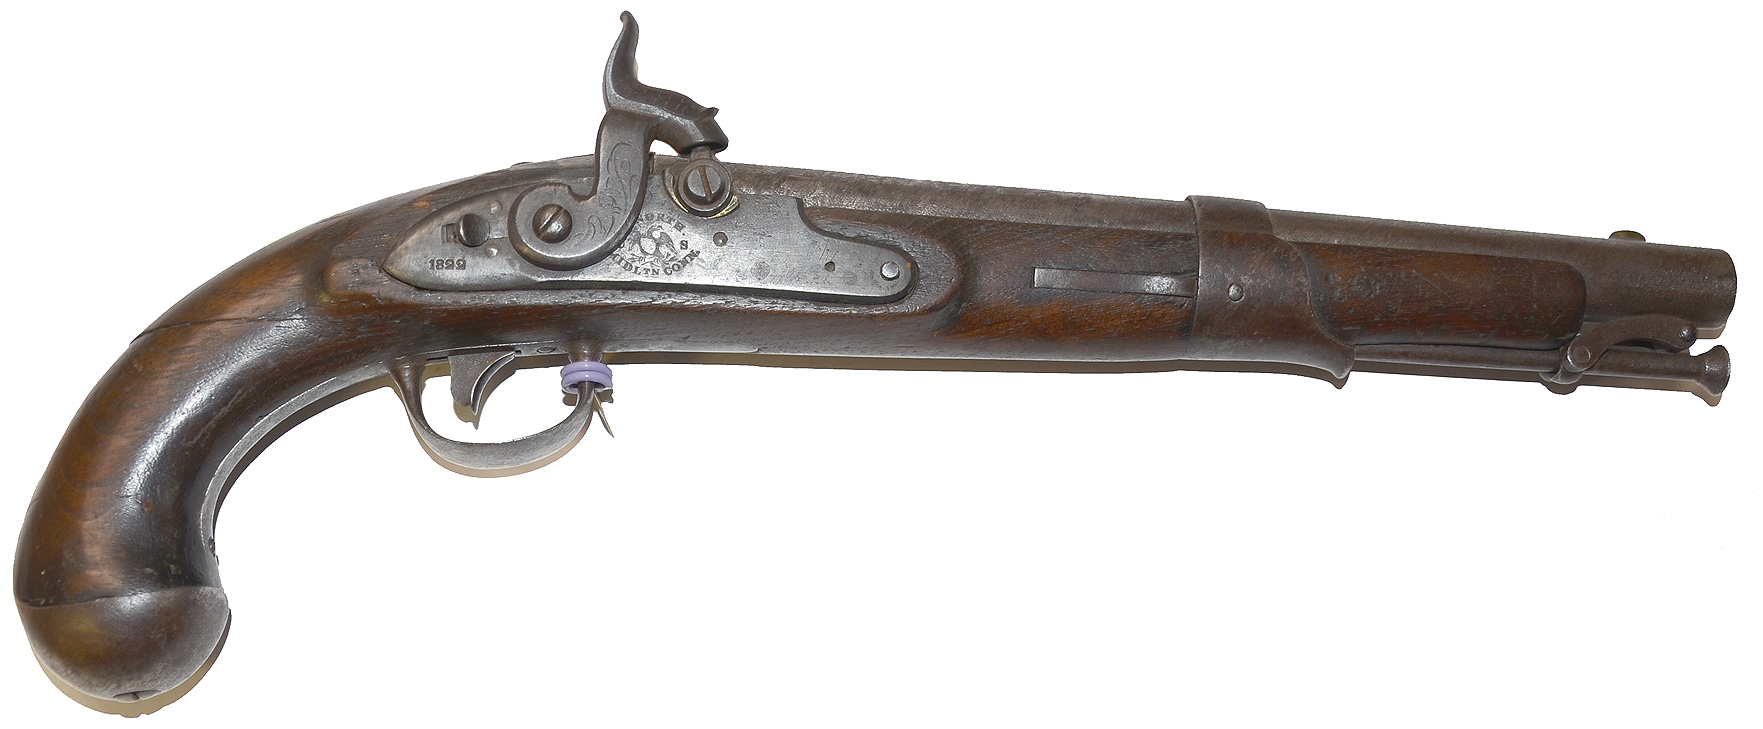 1819 NORTH PERCUSSION-CONVERSION PISTOL PICKED UP ON THE GETTYSBURG BATTLEFIELD